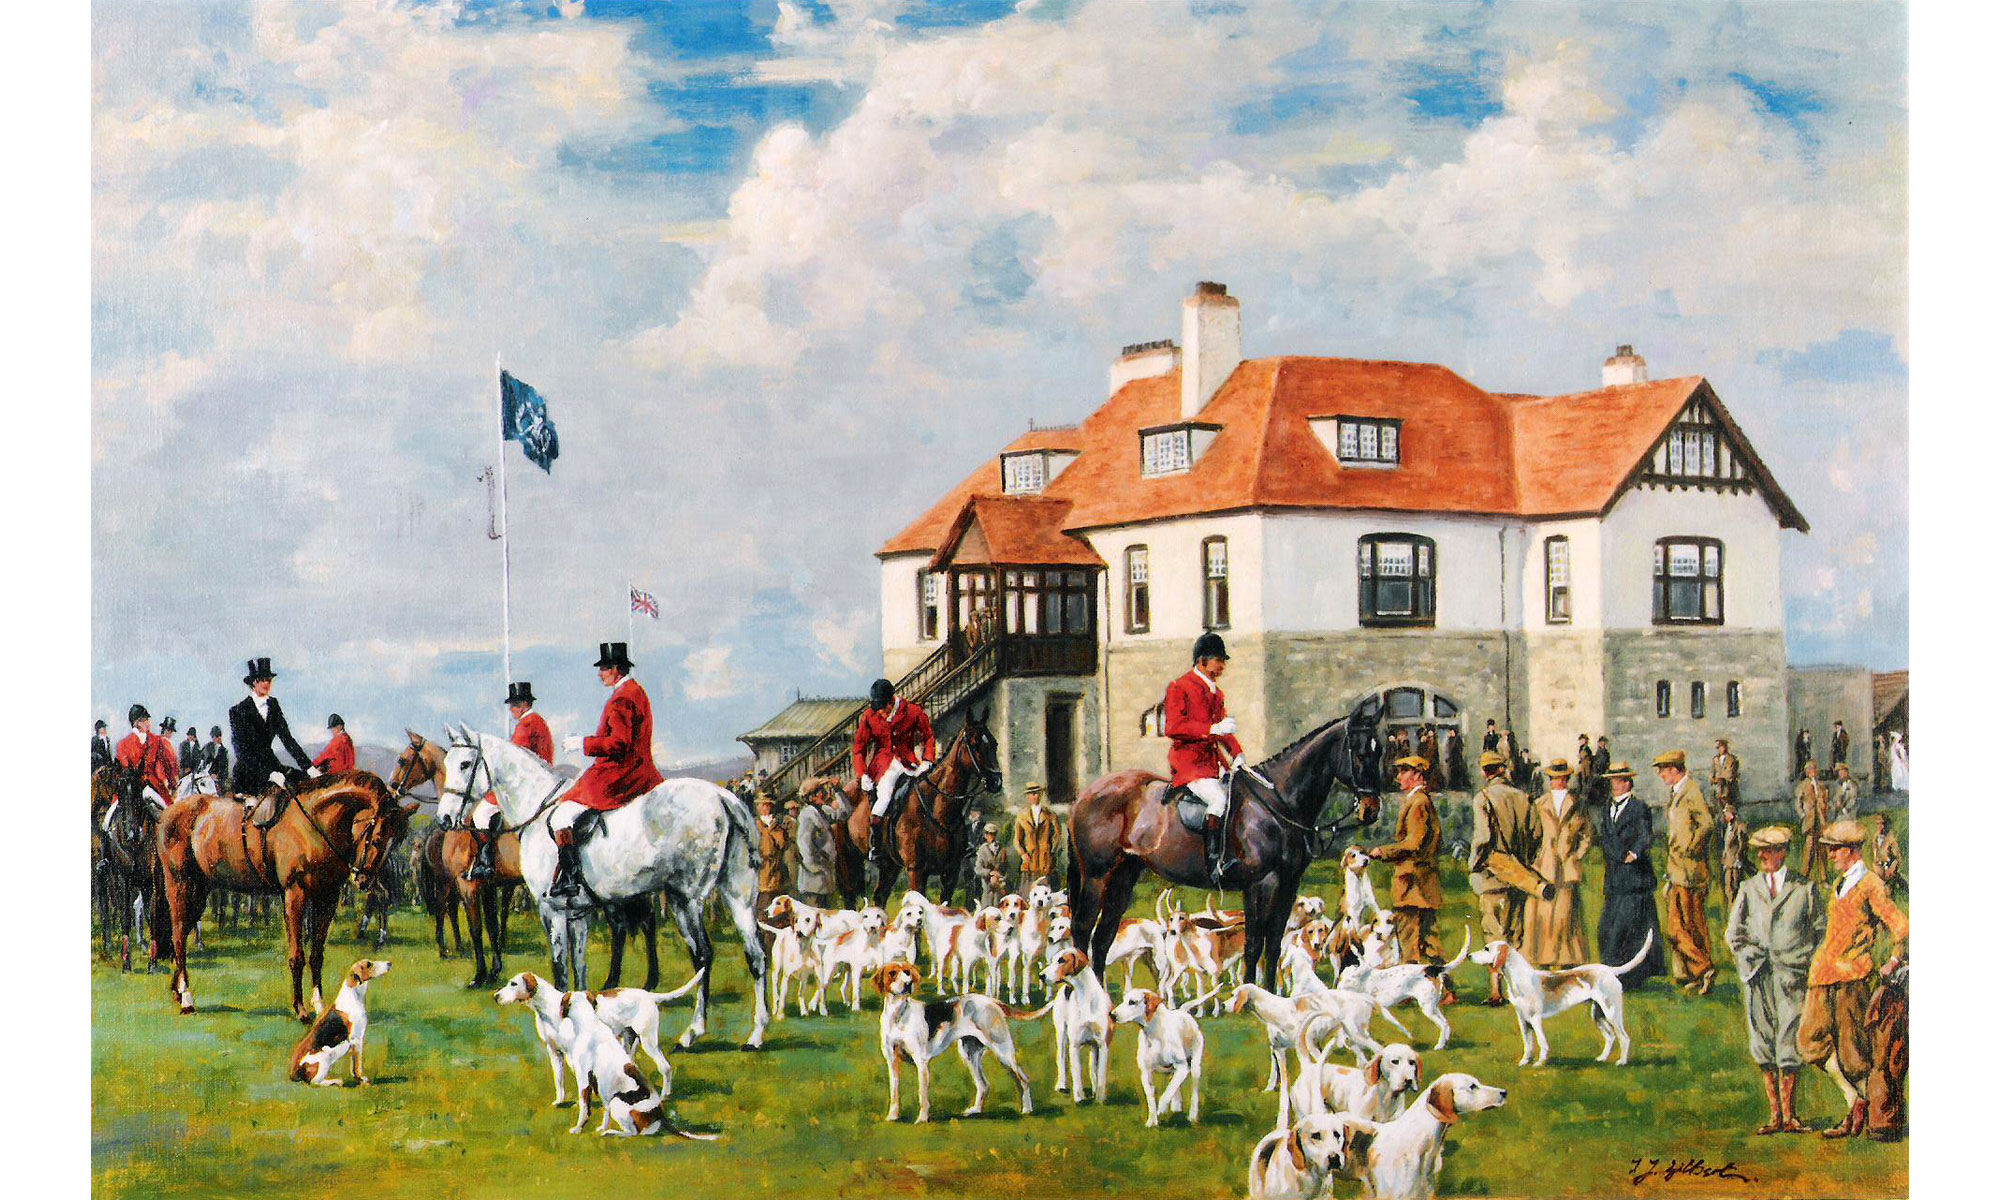 County Down Golf Club Hunting Painting by Terence J Gilbert Oil on Canvas